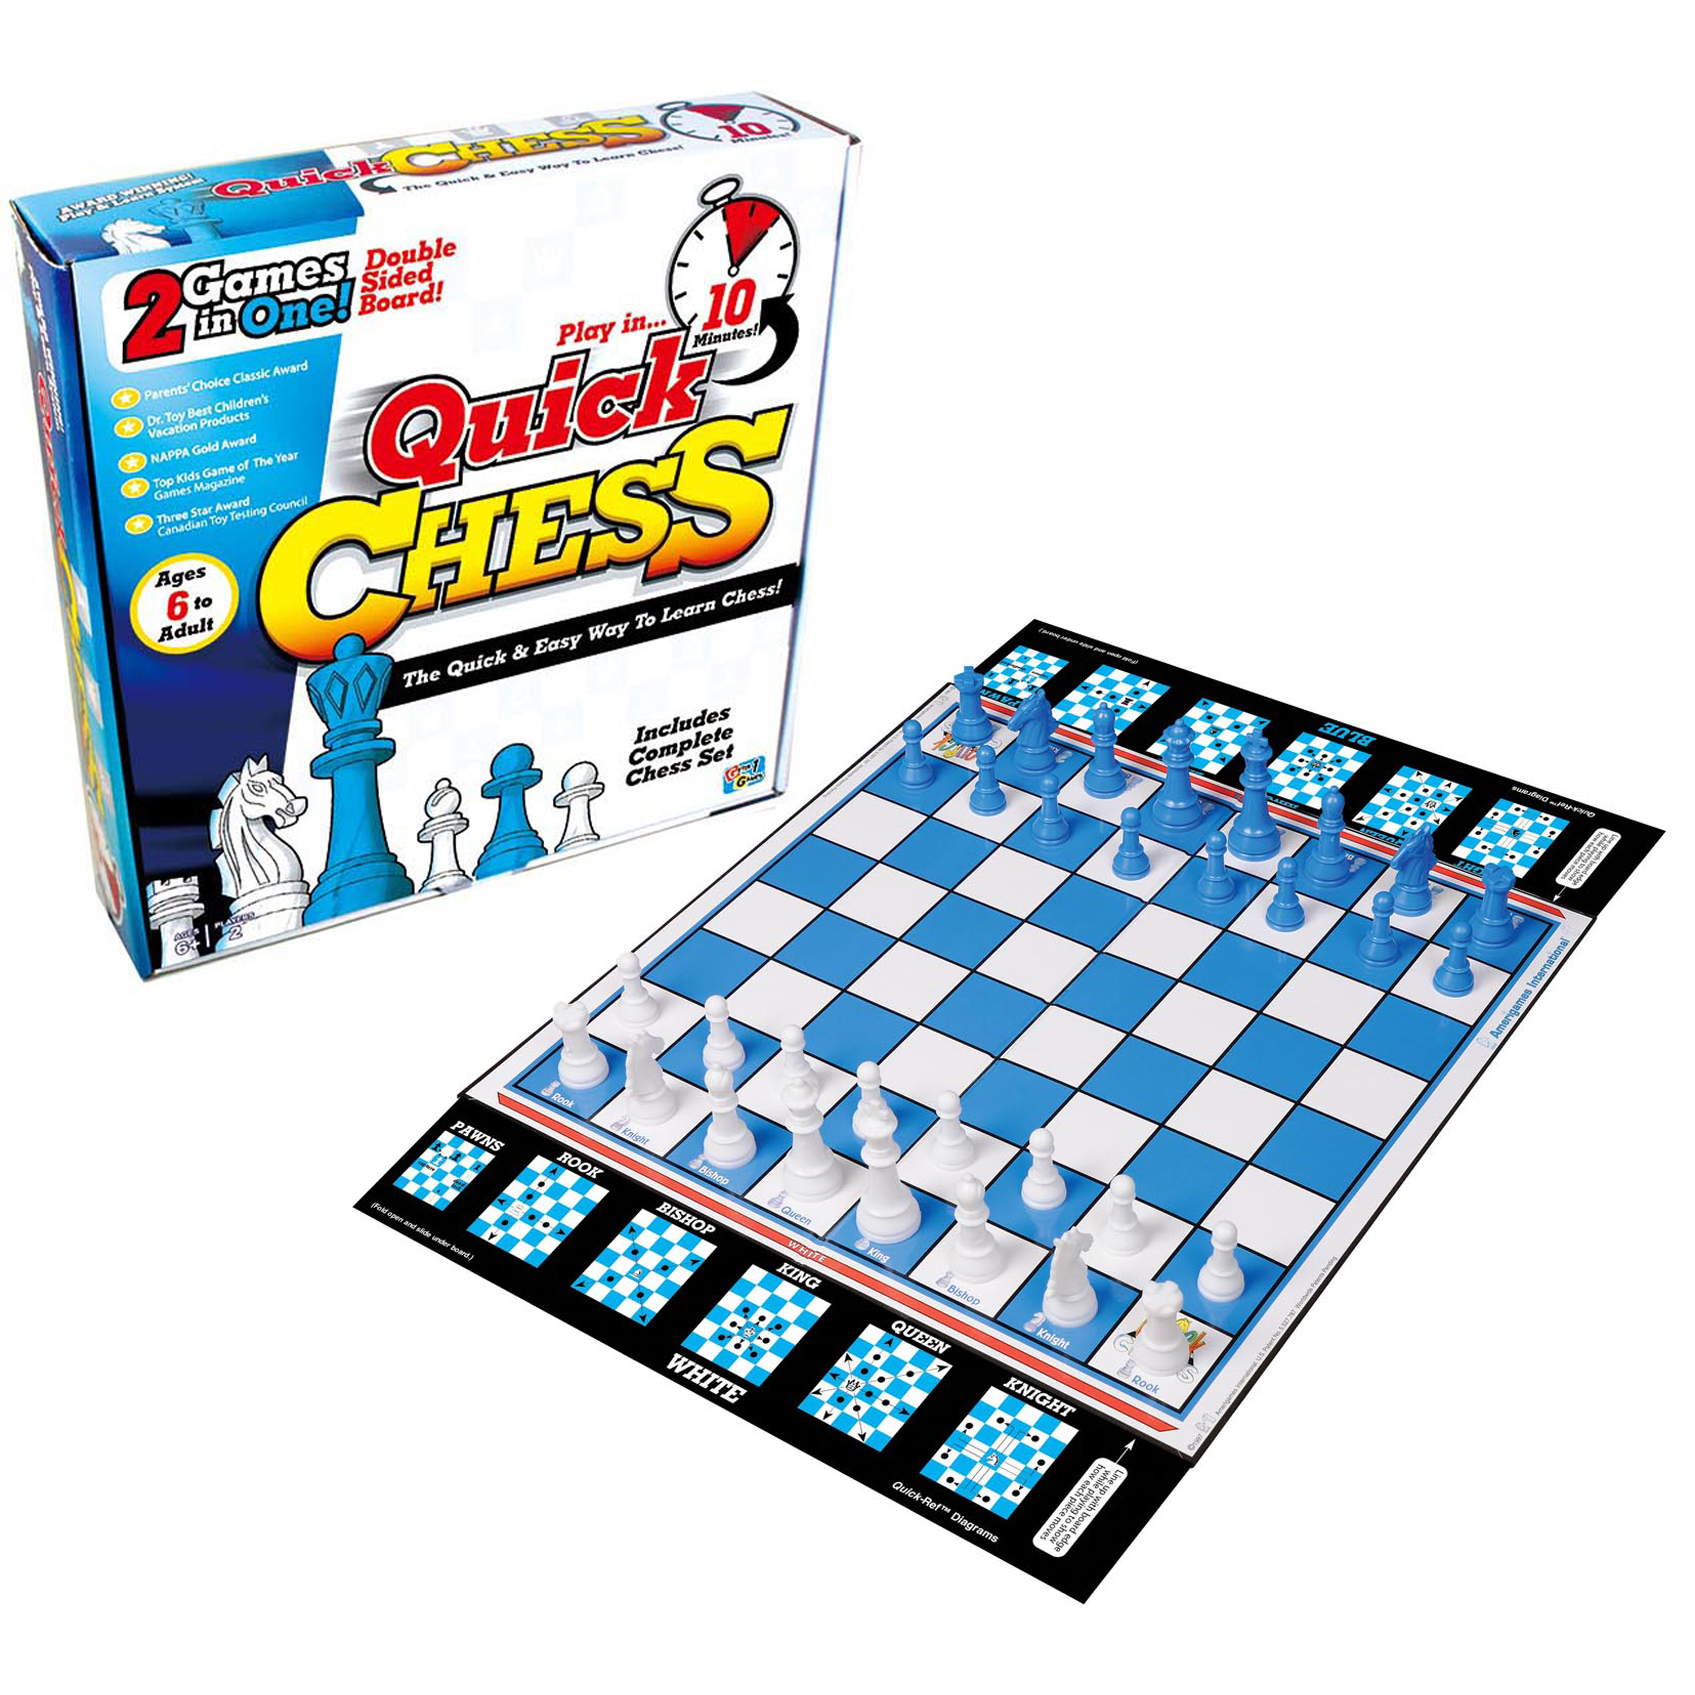 ROO GAMES Quick Chess - Learn Chess with 8 Simple Activities - For Ages 6+